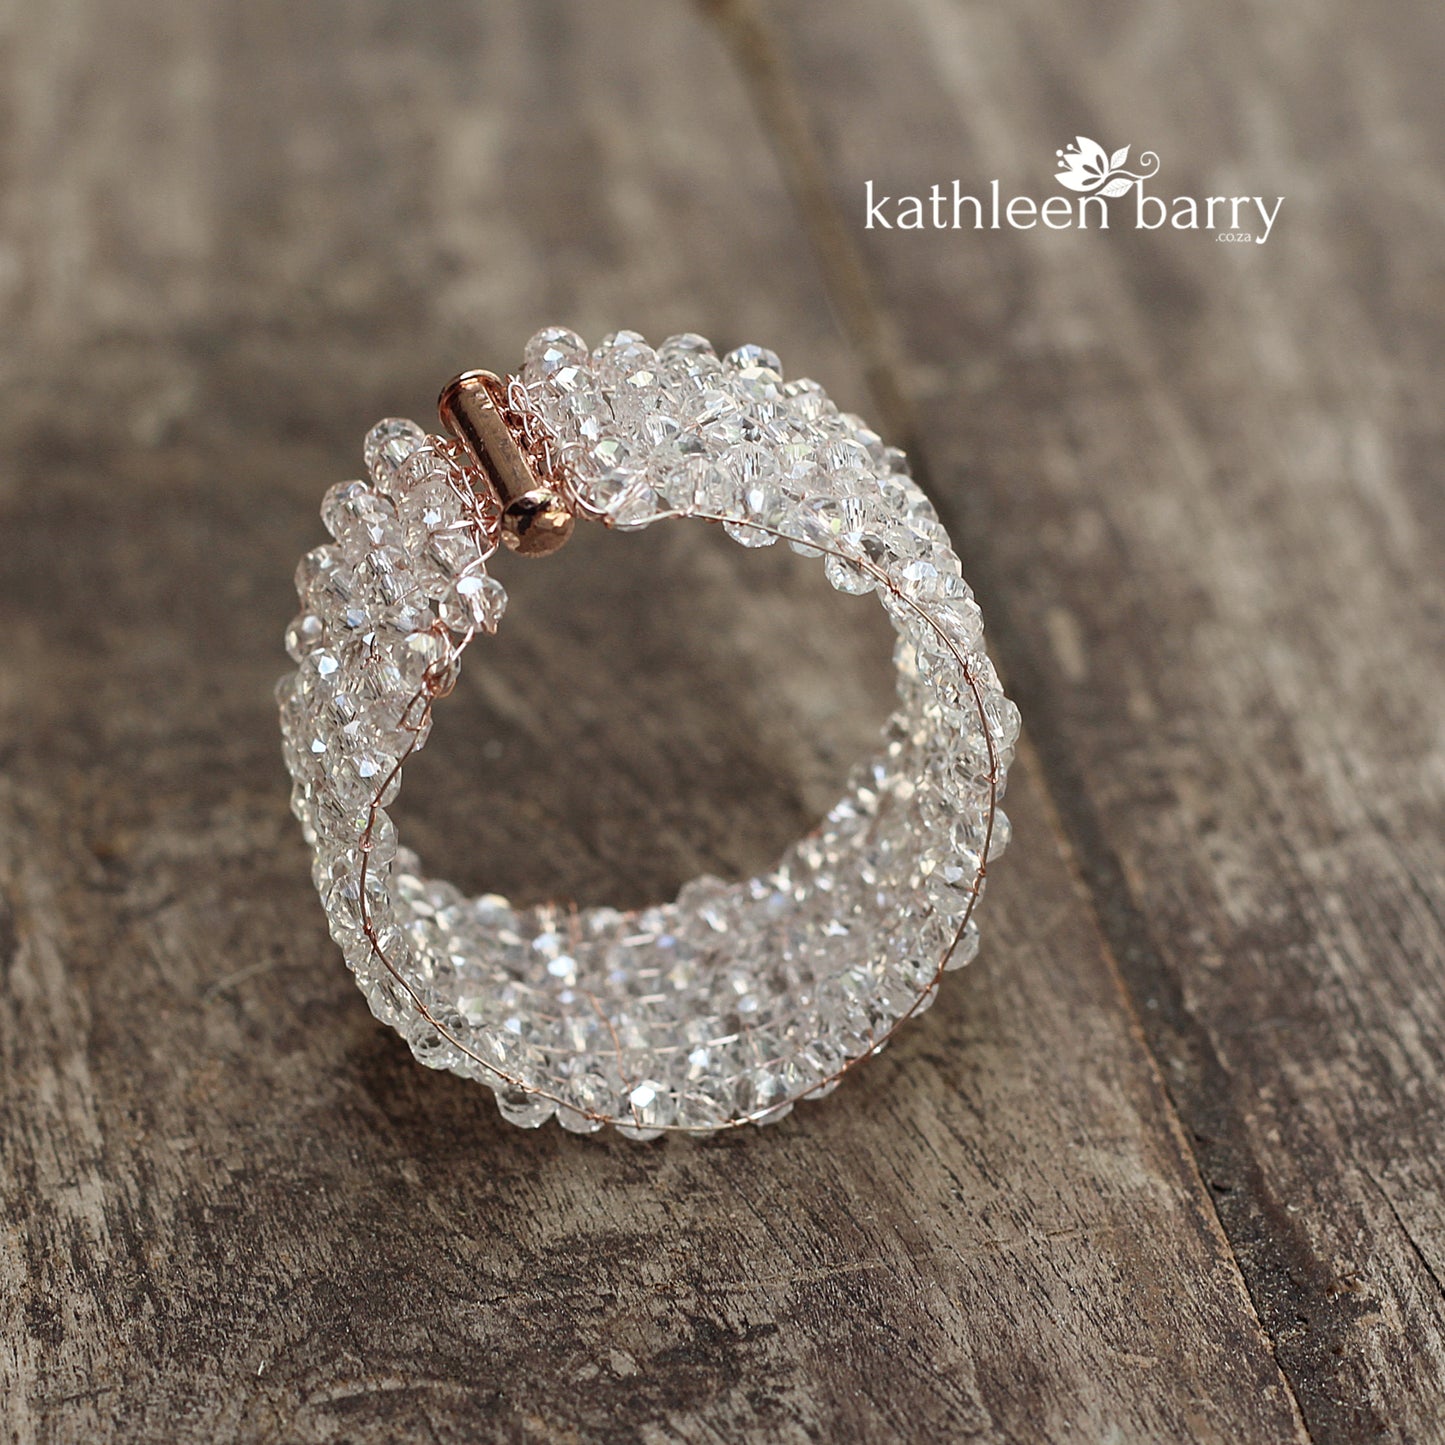 Morgan crystal cuff bracelet - Available in Gold, Silver or Rose Gold